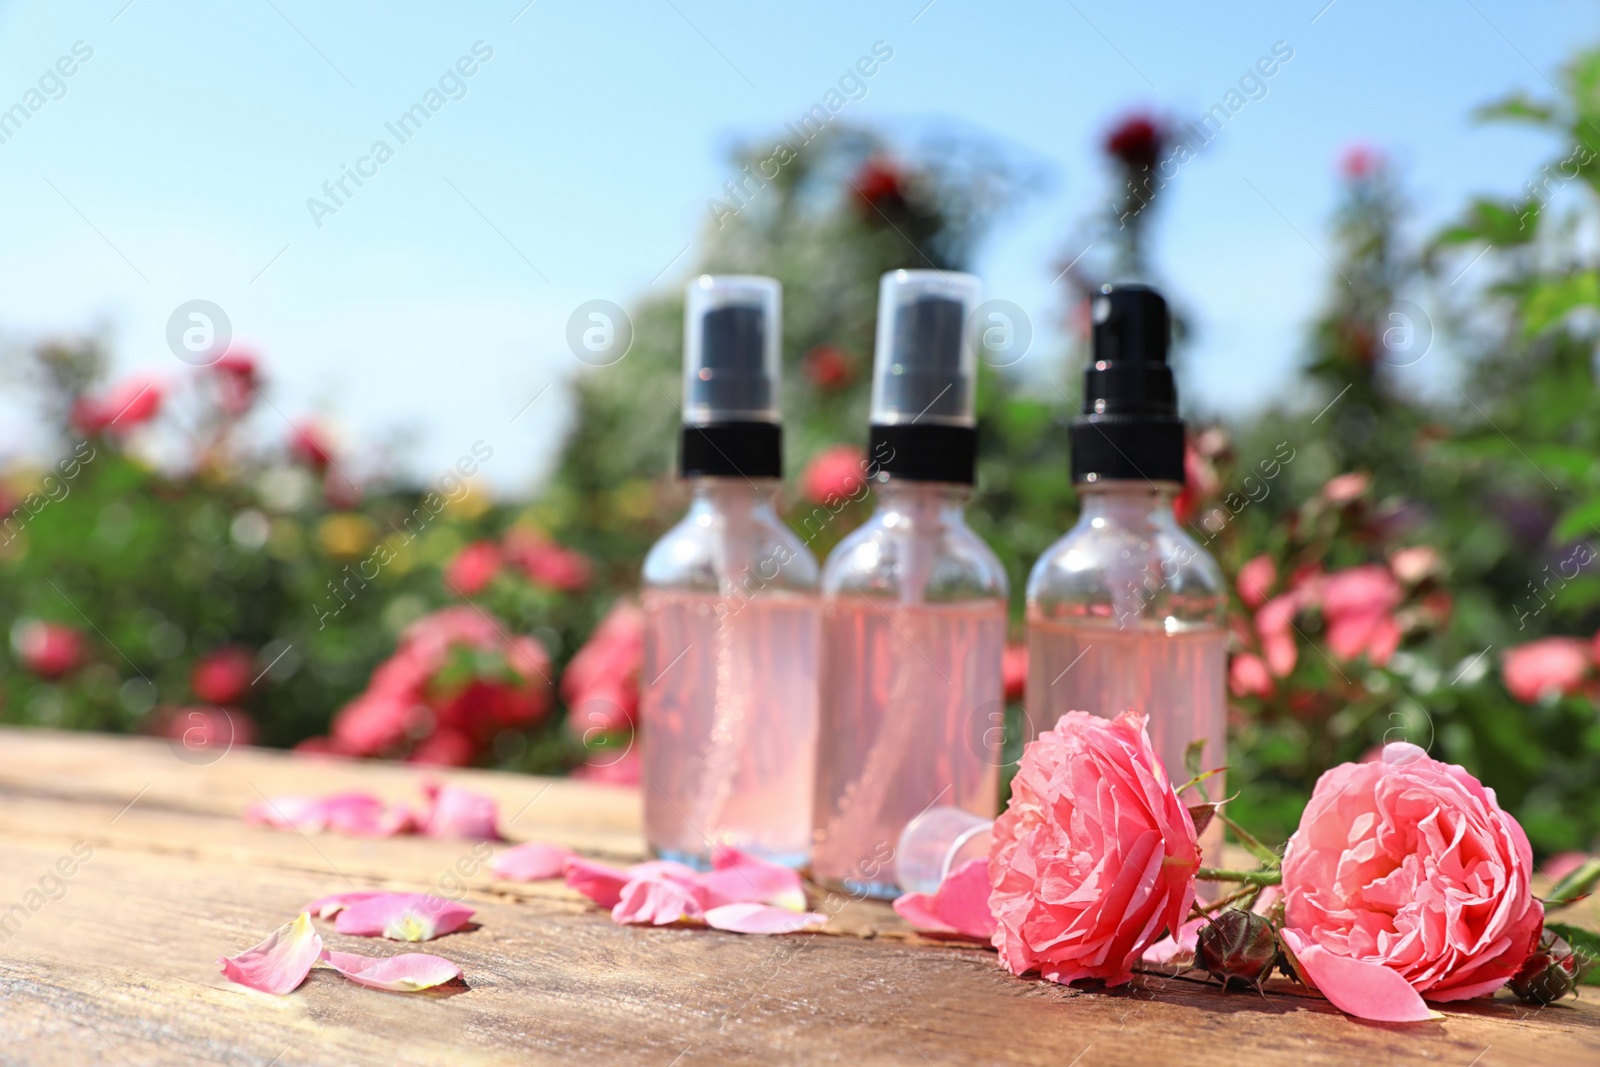 Photo of Bottles of facial toner with essential oil and fresh roses on wooden table against blurred background